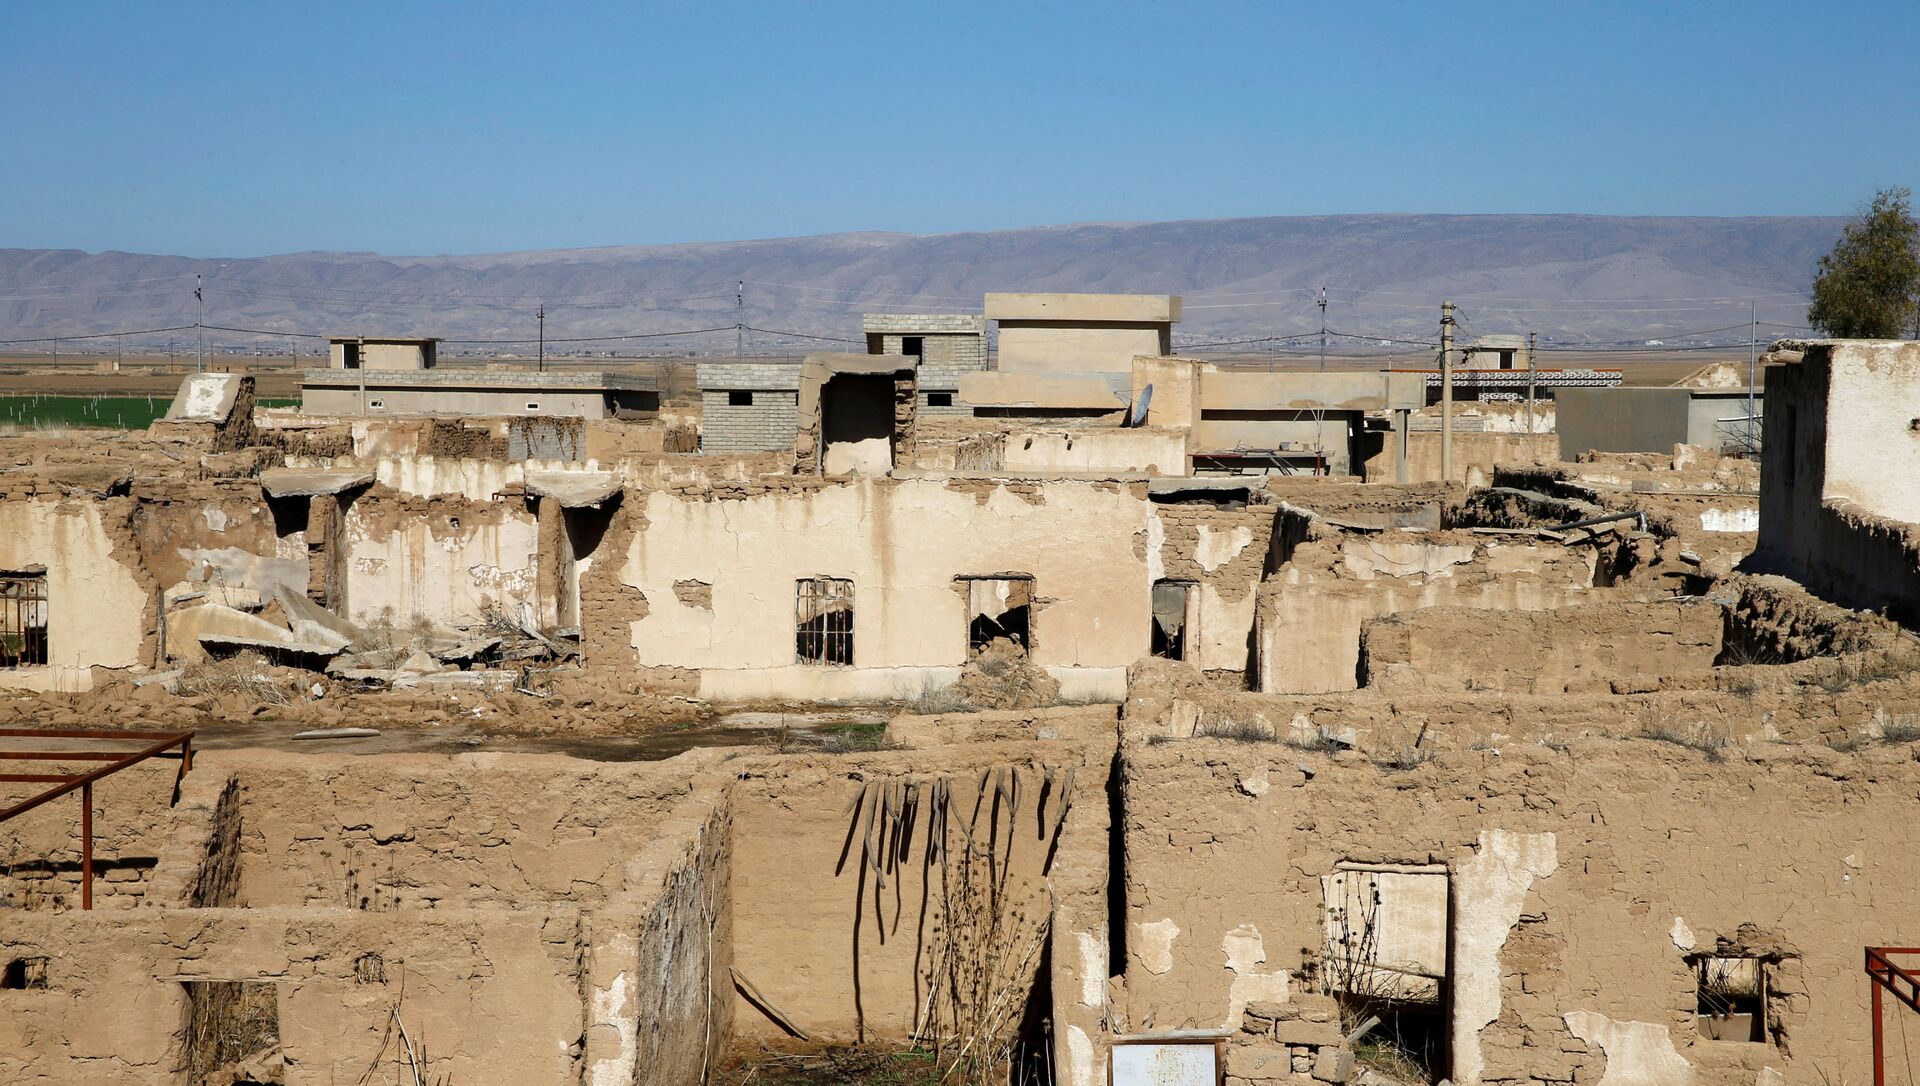 A view shows remains of houses destroyed in past Islamic State militant attacks, in Kojo, Iraq February 7, 2021. Picture taken February 7, 2021. - Sputnik International, 1920, 18.02.2021